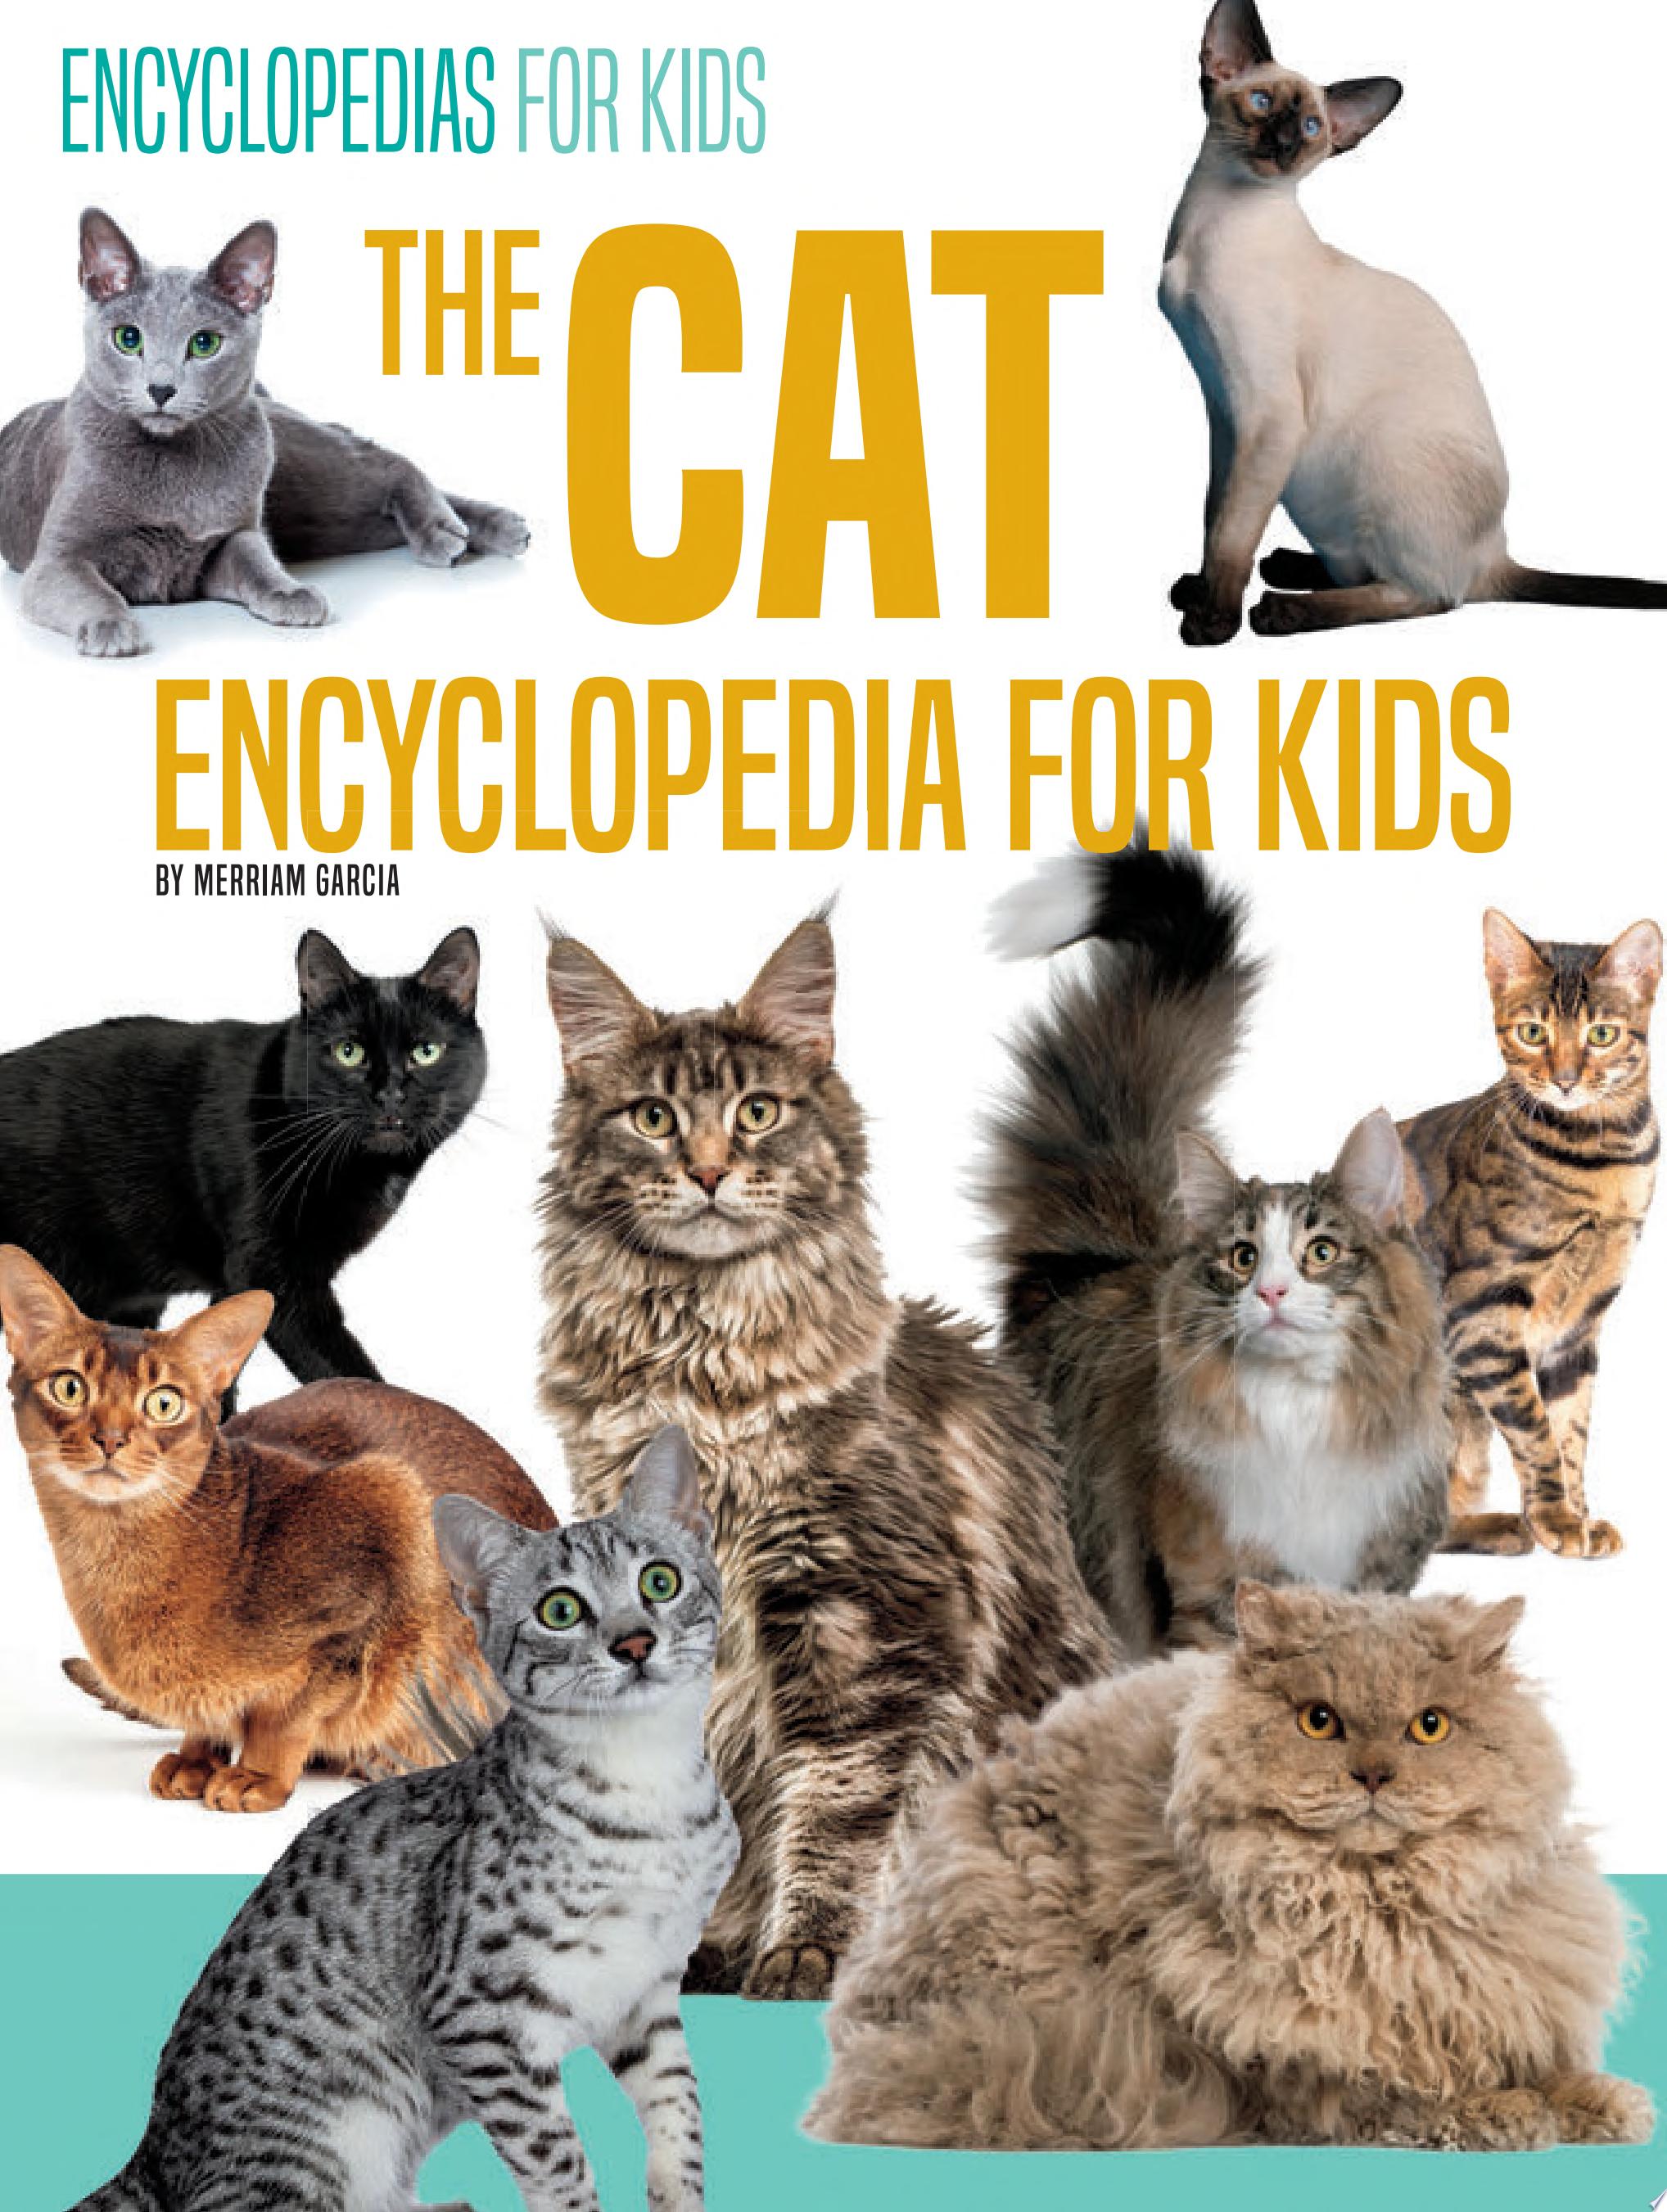 Image for "The Cat Encyclopedia for Kids"